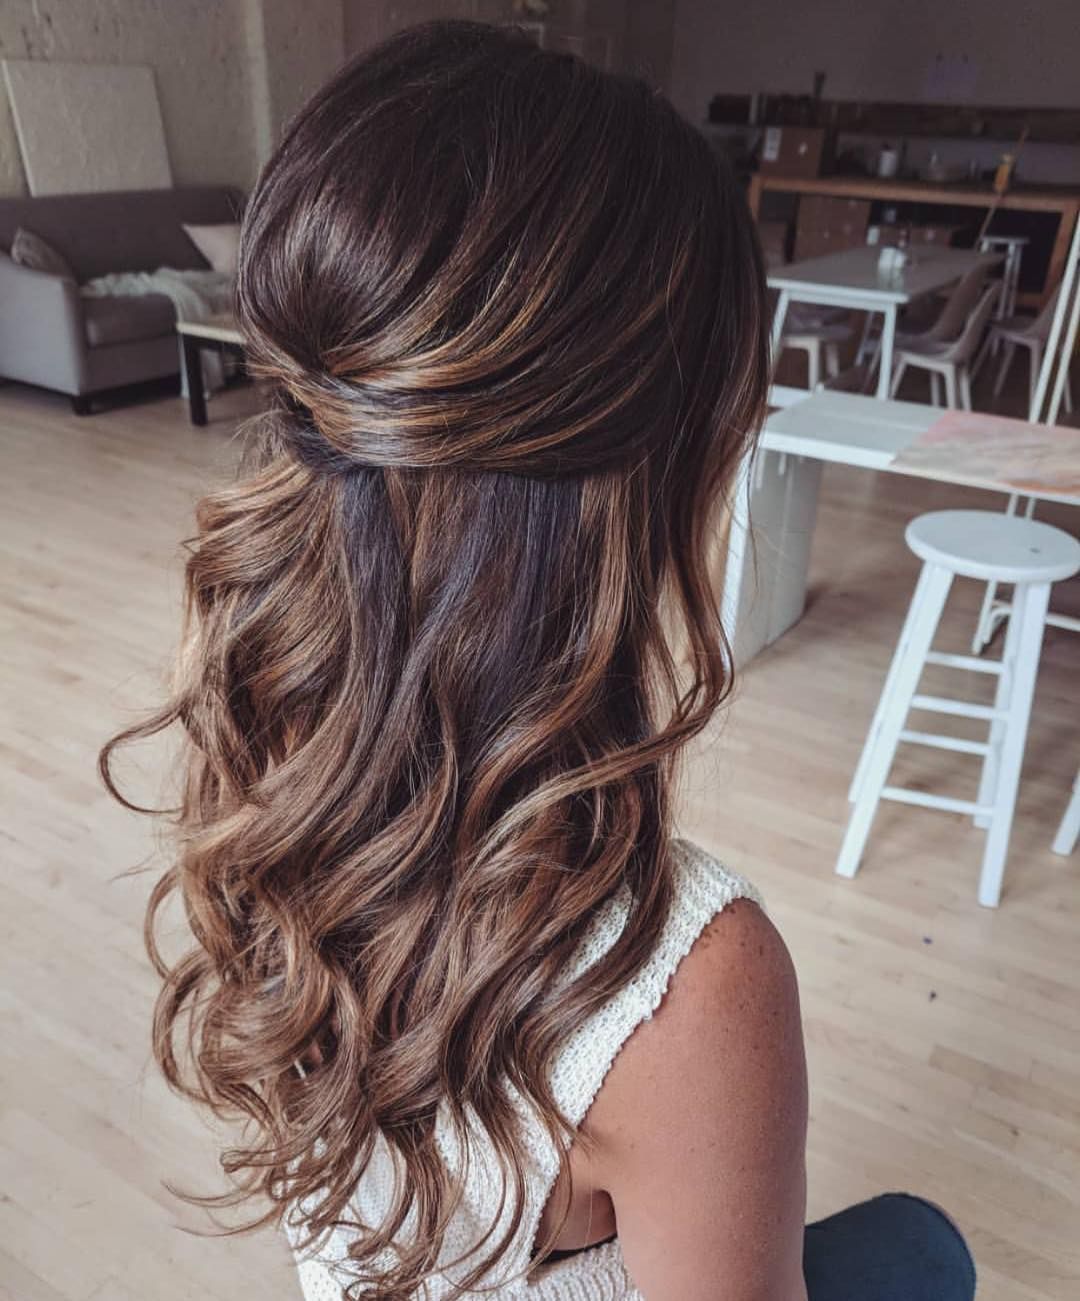 39 Gorgeous Half Up Half Down Hairstyles -   15 hairstyles Half Up Half Down up dos ideas